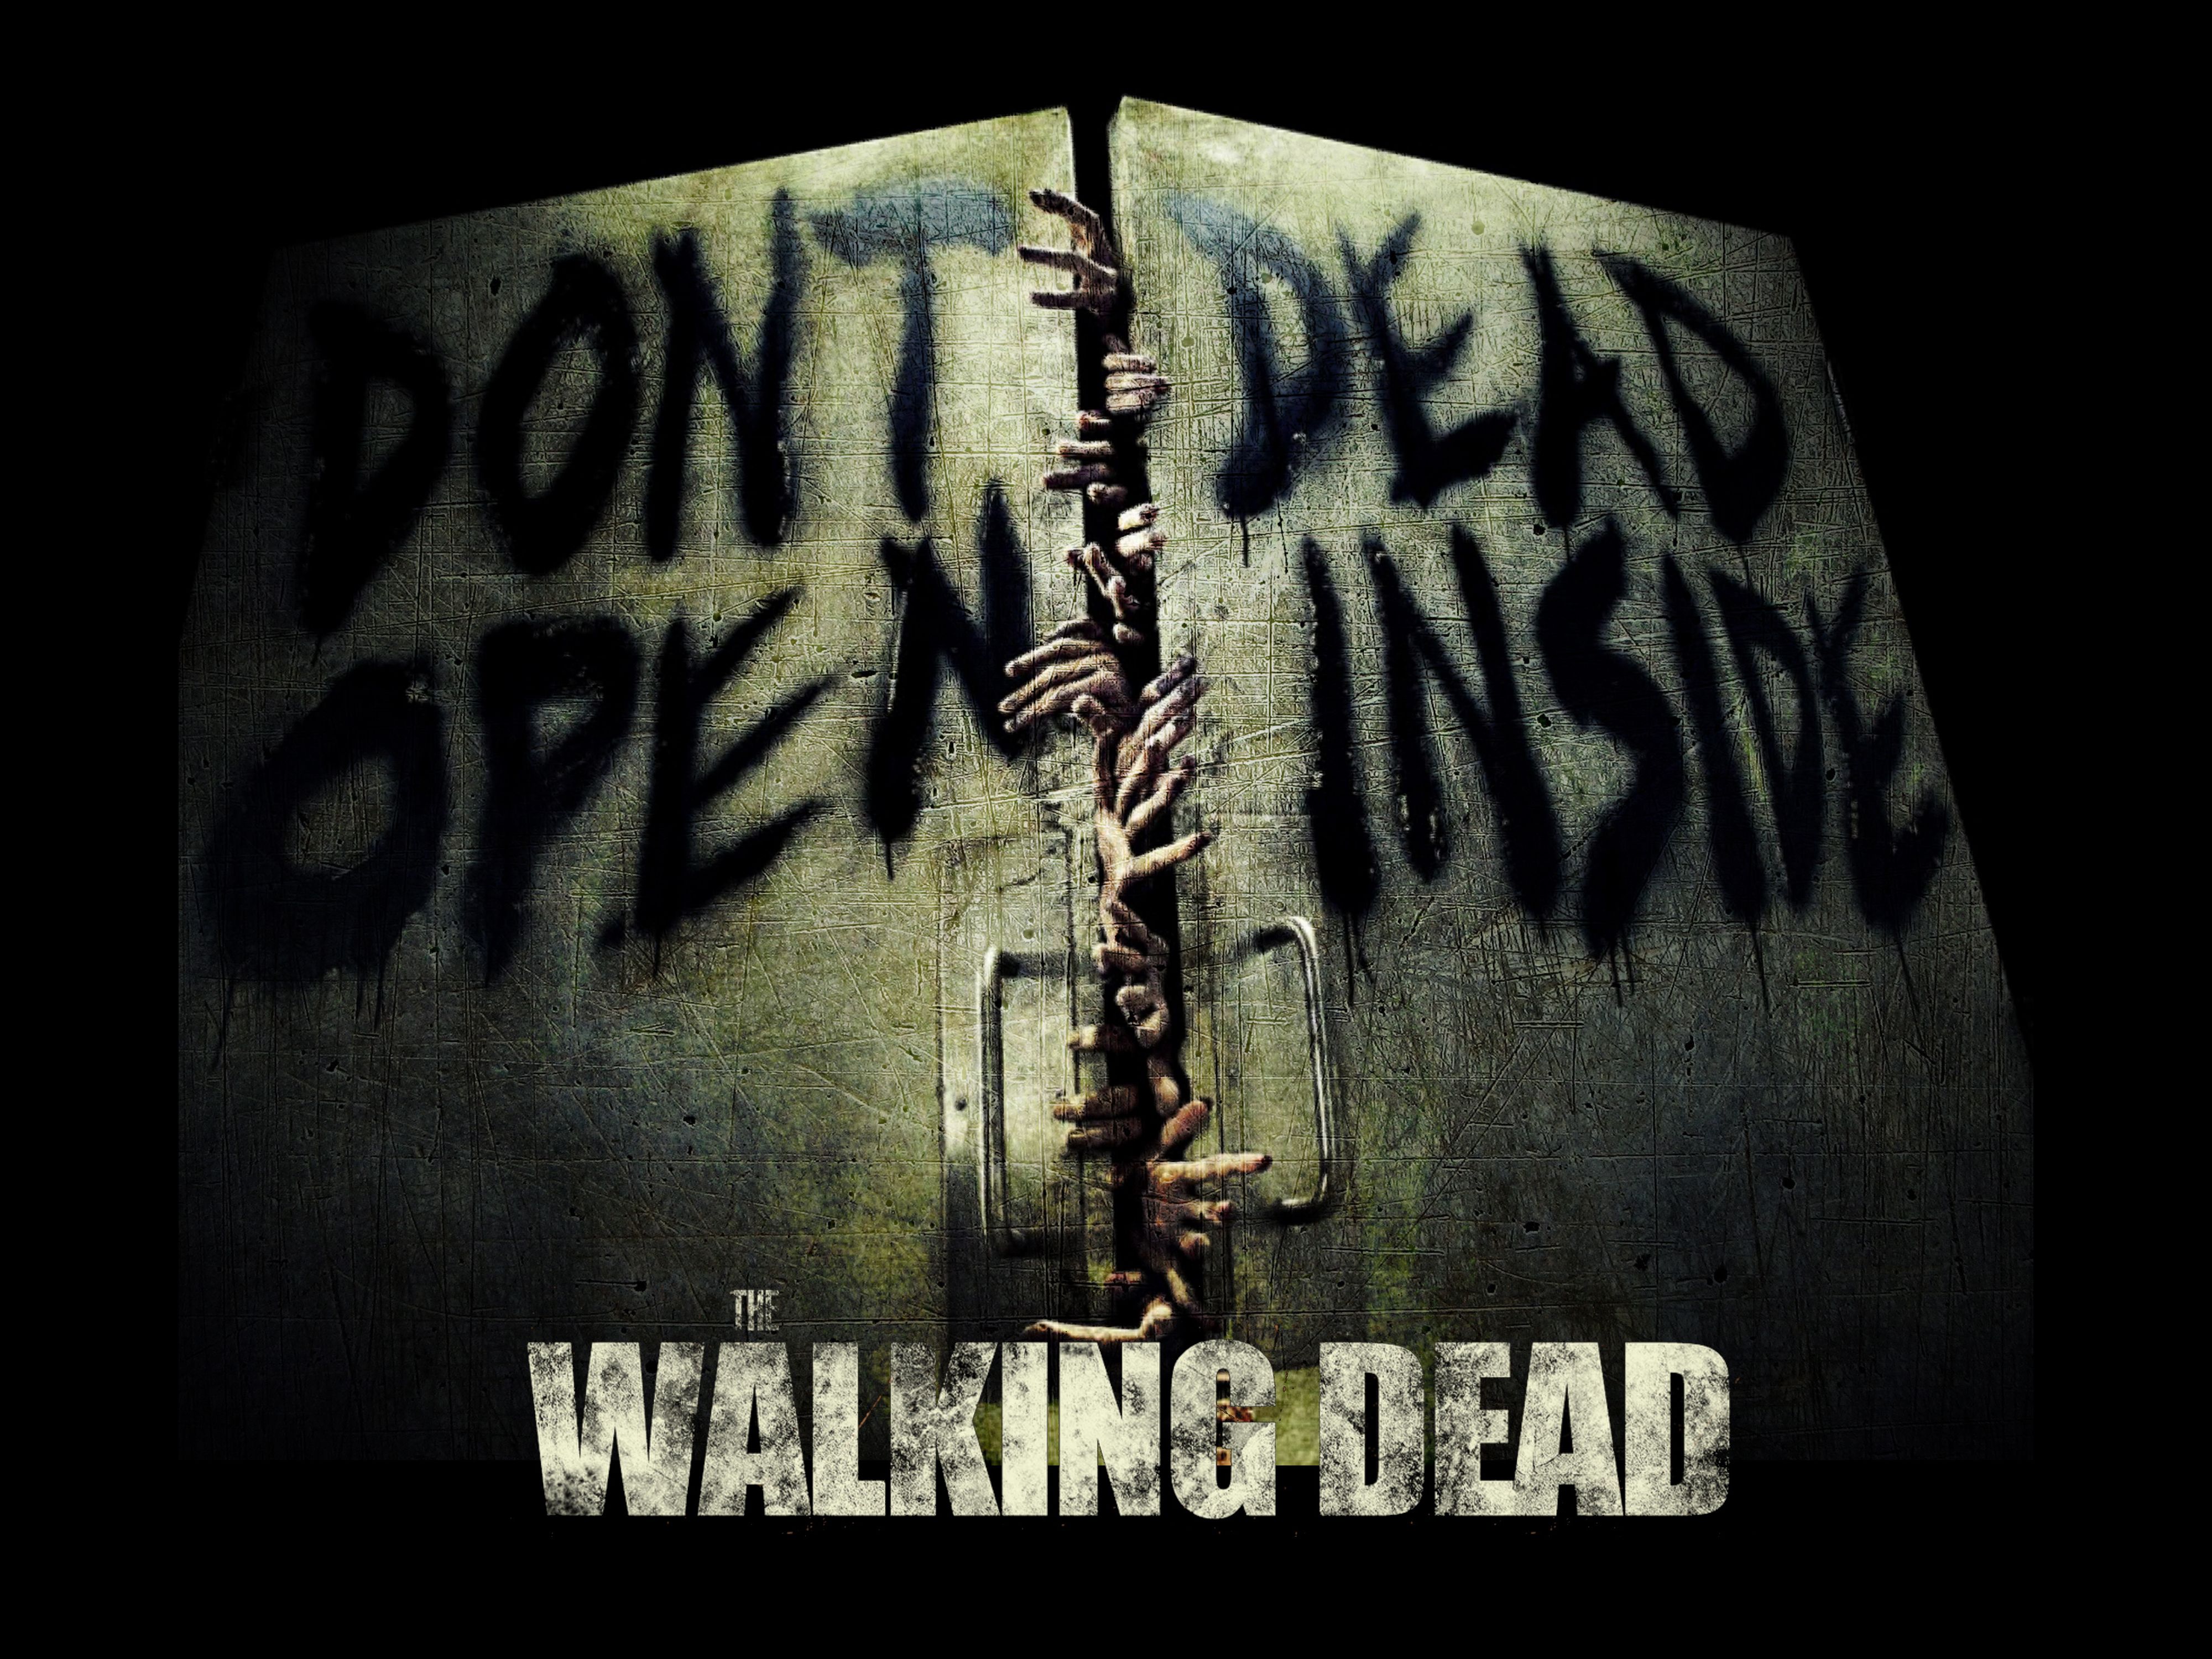 The Walking Dead Wallpaper - HD Wallpapers Backgrounds of Your Choice